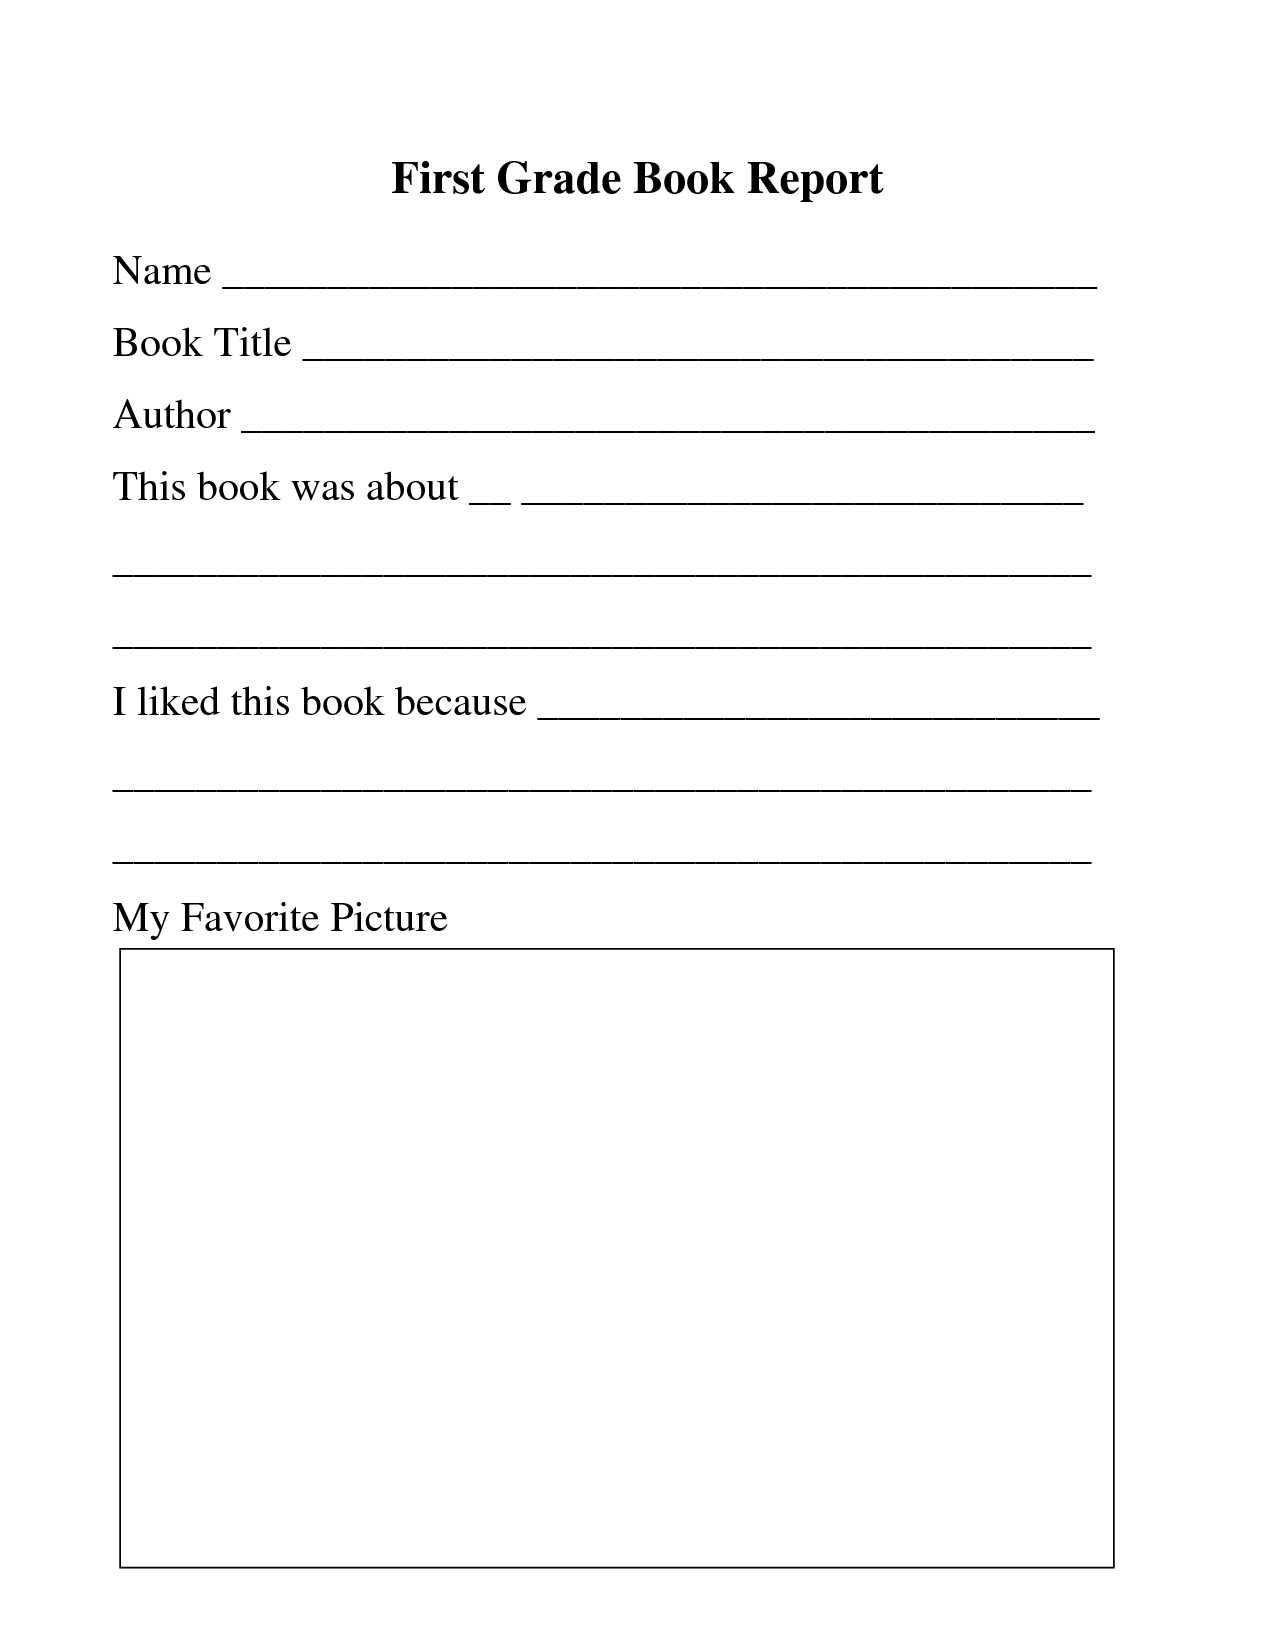 28 Images Of Template For First Grade List | Masorler With Regard To First Grade Book Report Template